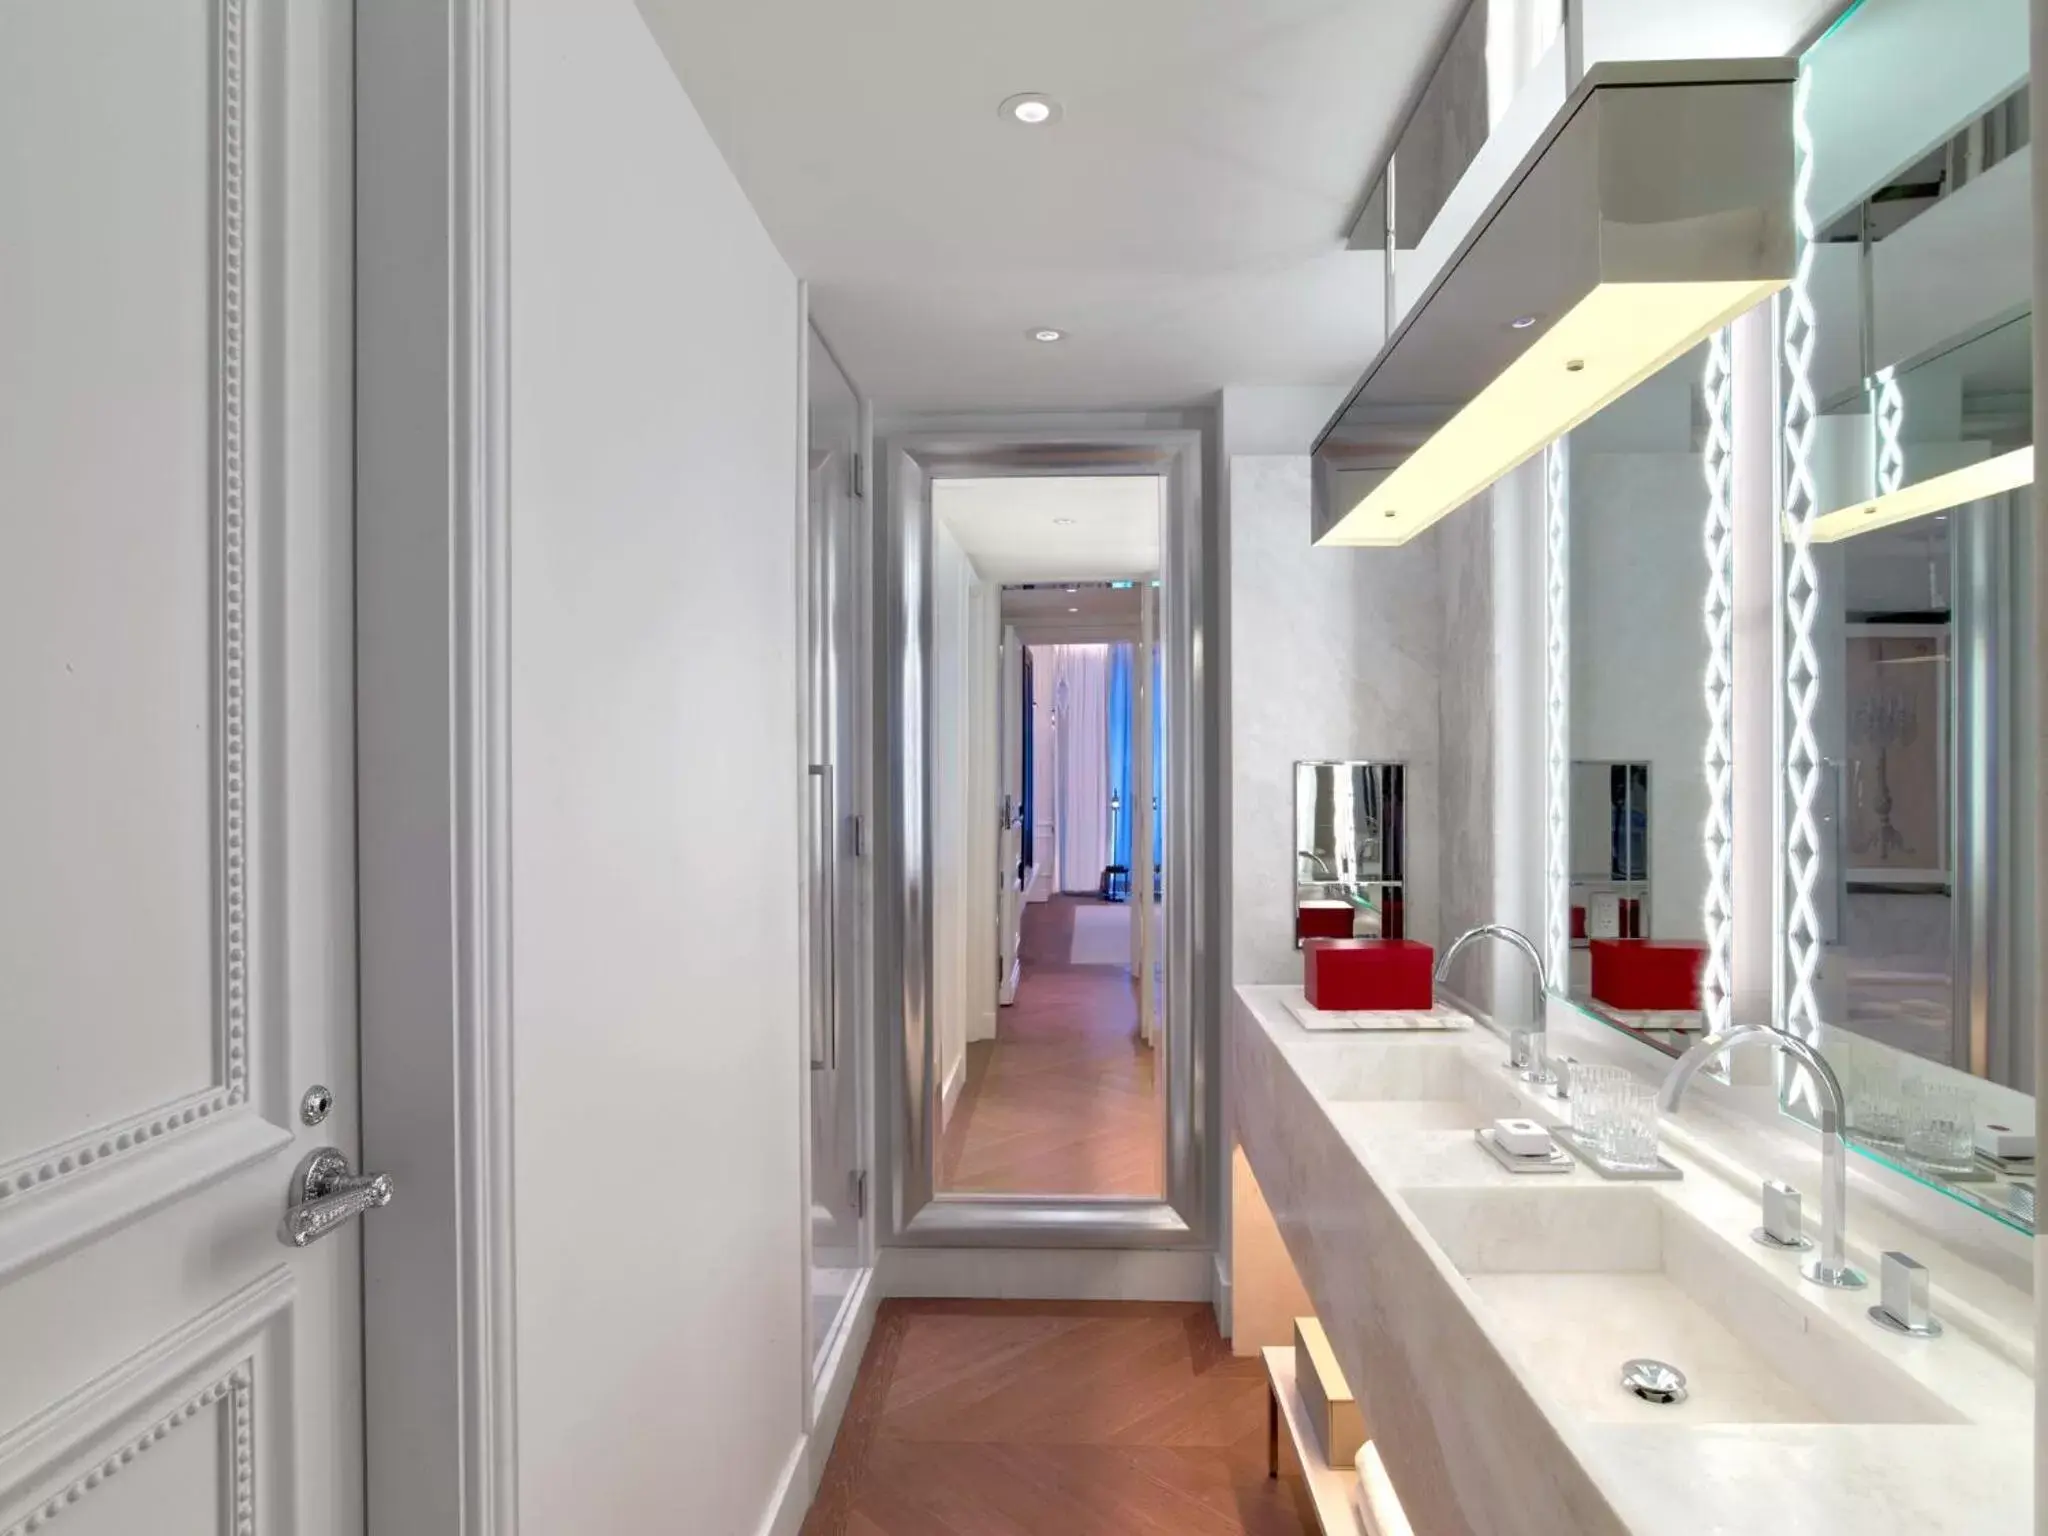 Bathroom in Baccarat Hotel and Residences New York